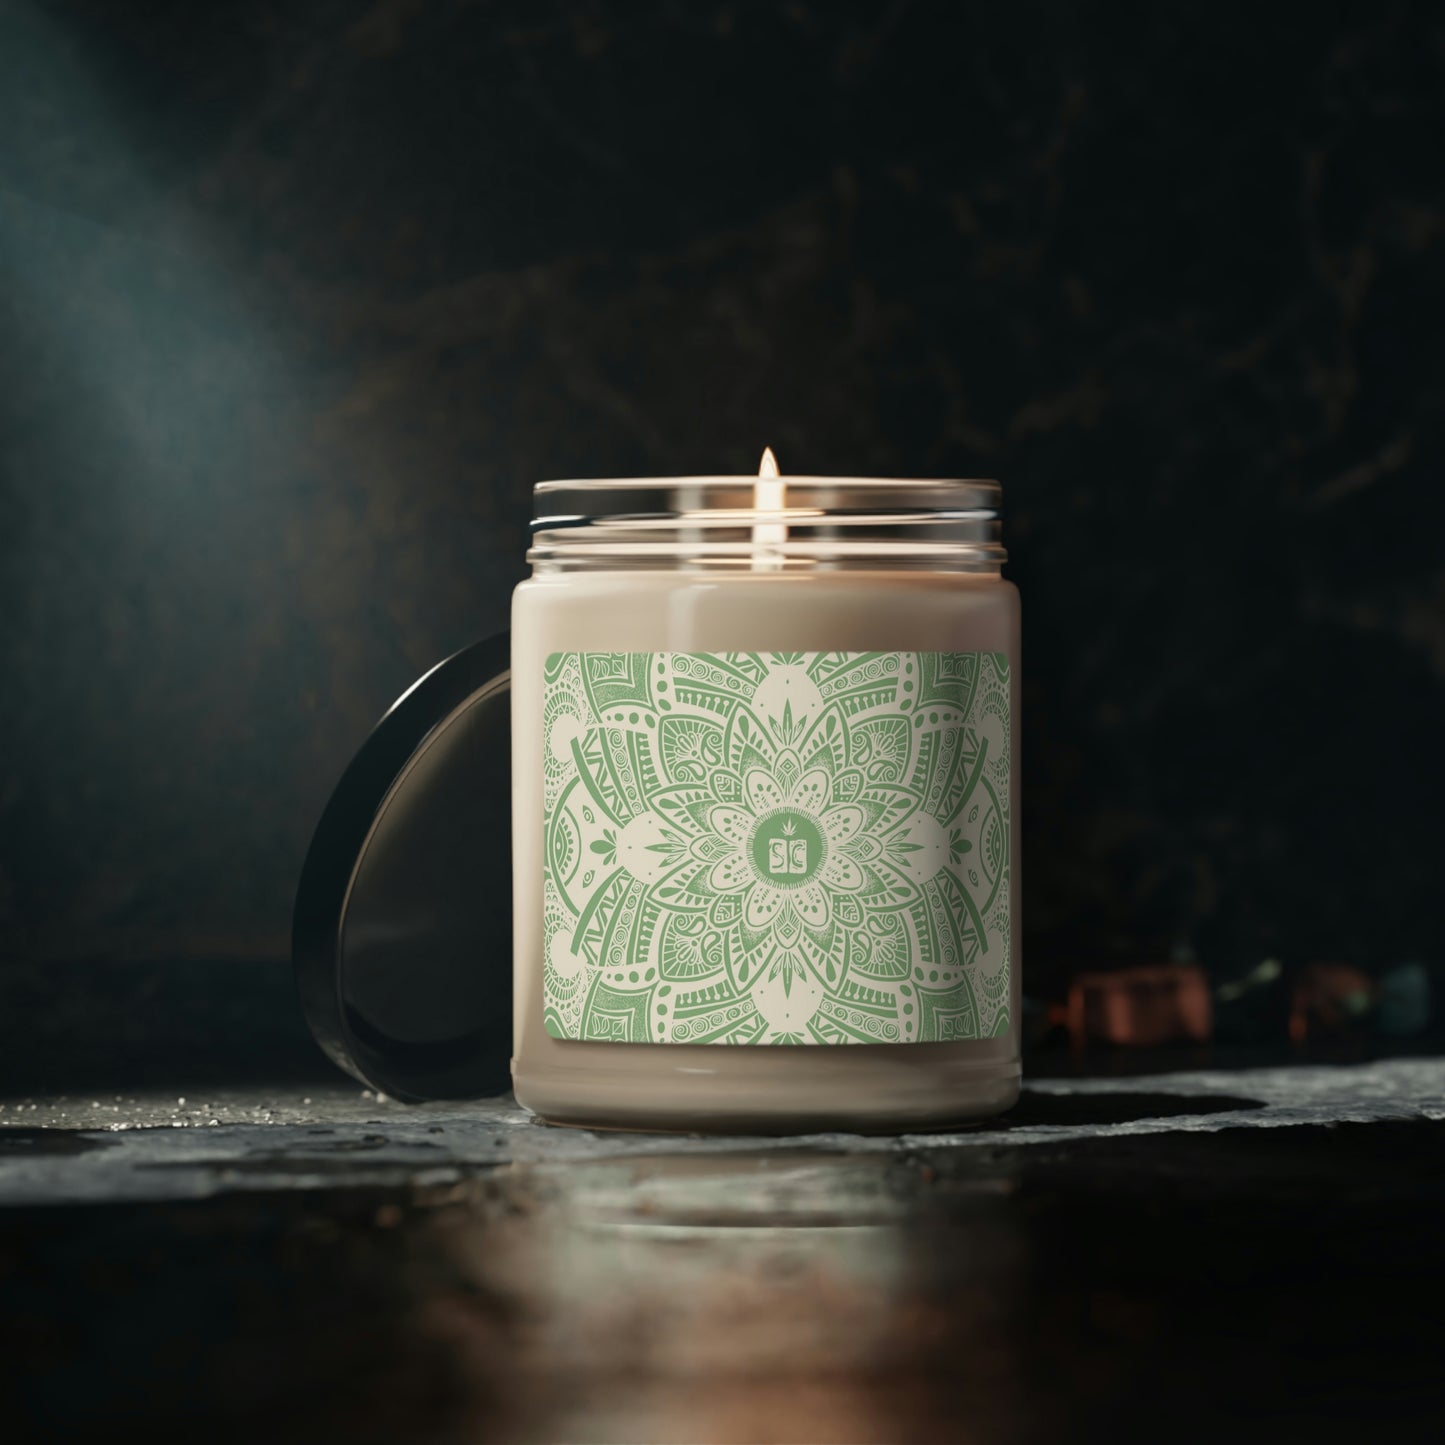 Shmacked Scented Candles - 5 Different Scents